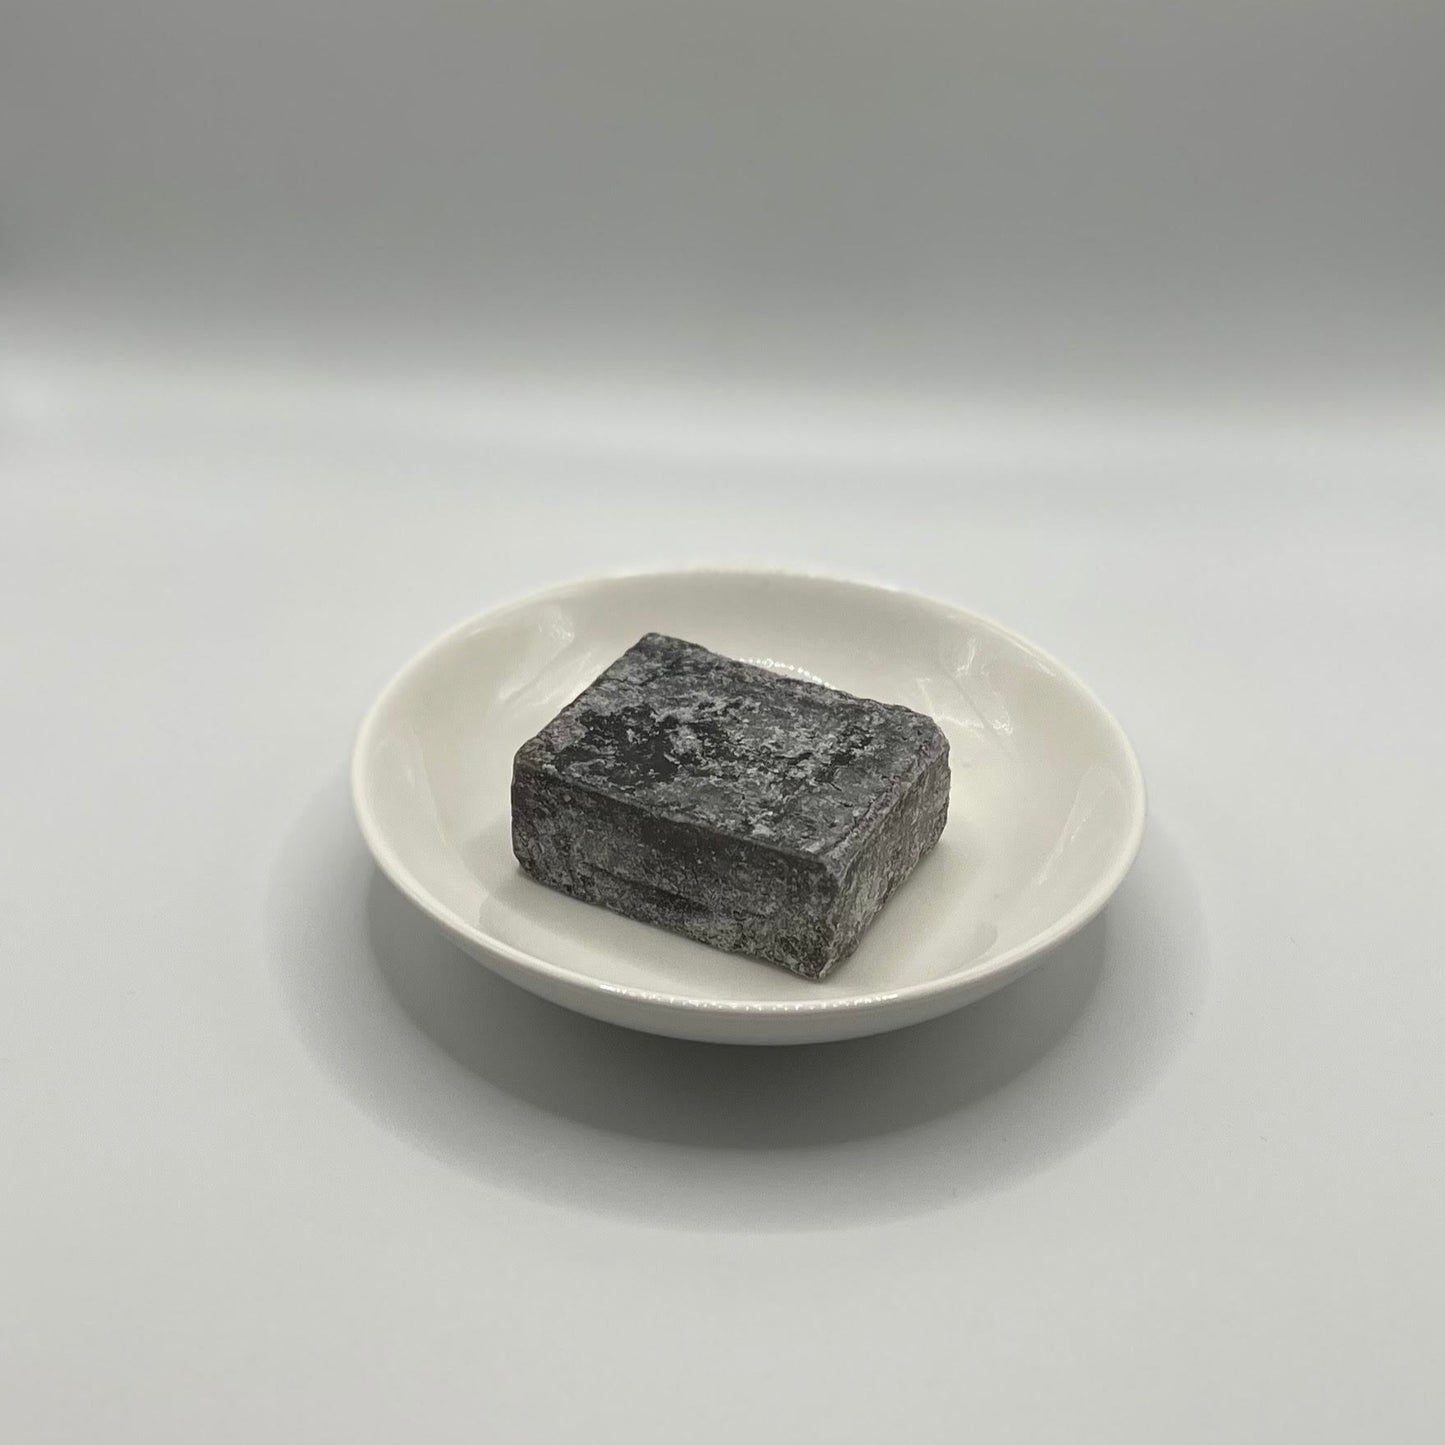 SOLID MUSK CUBE (black musk)